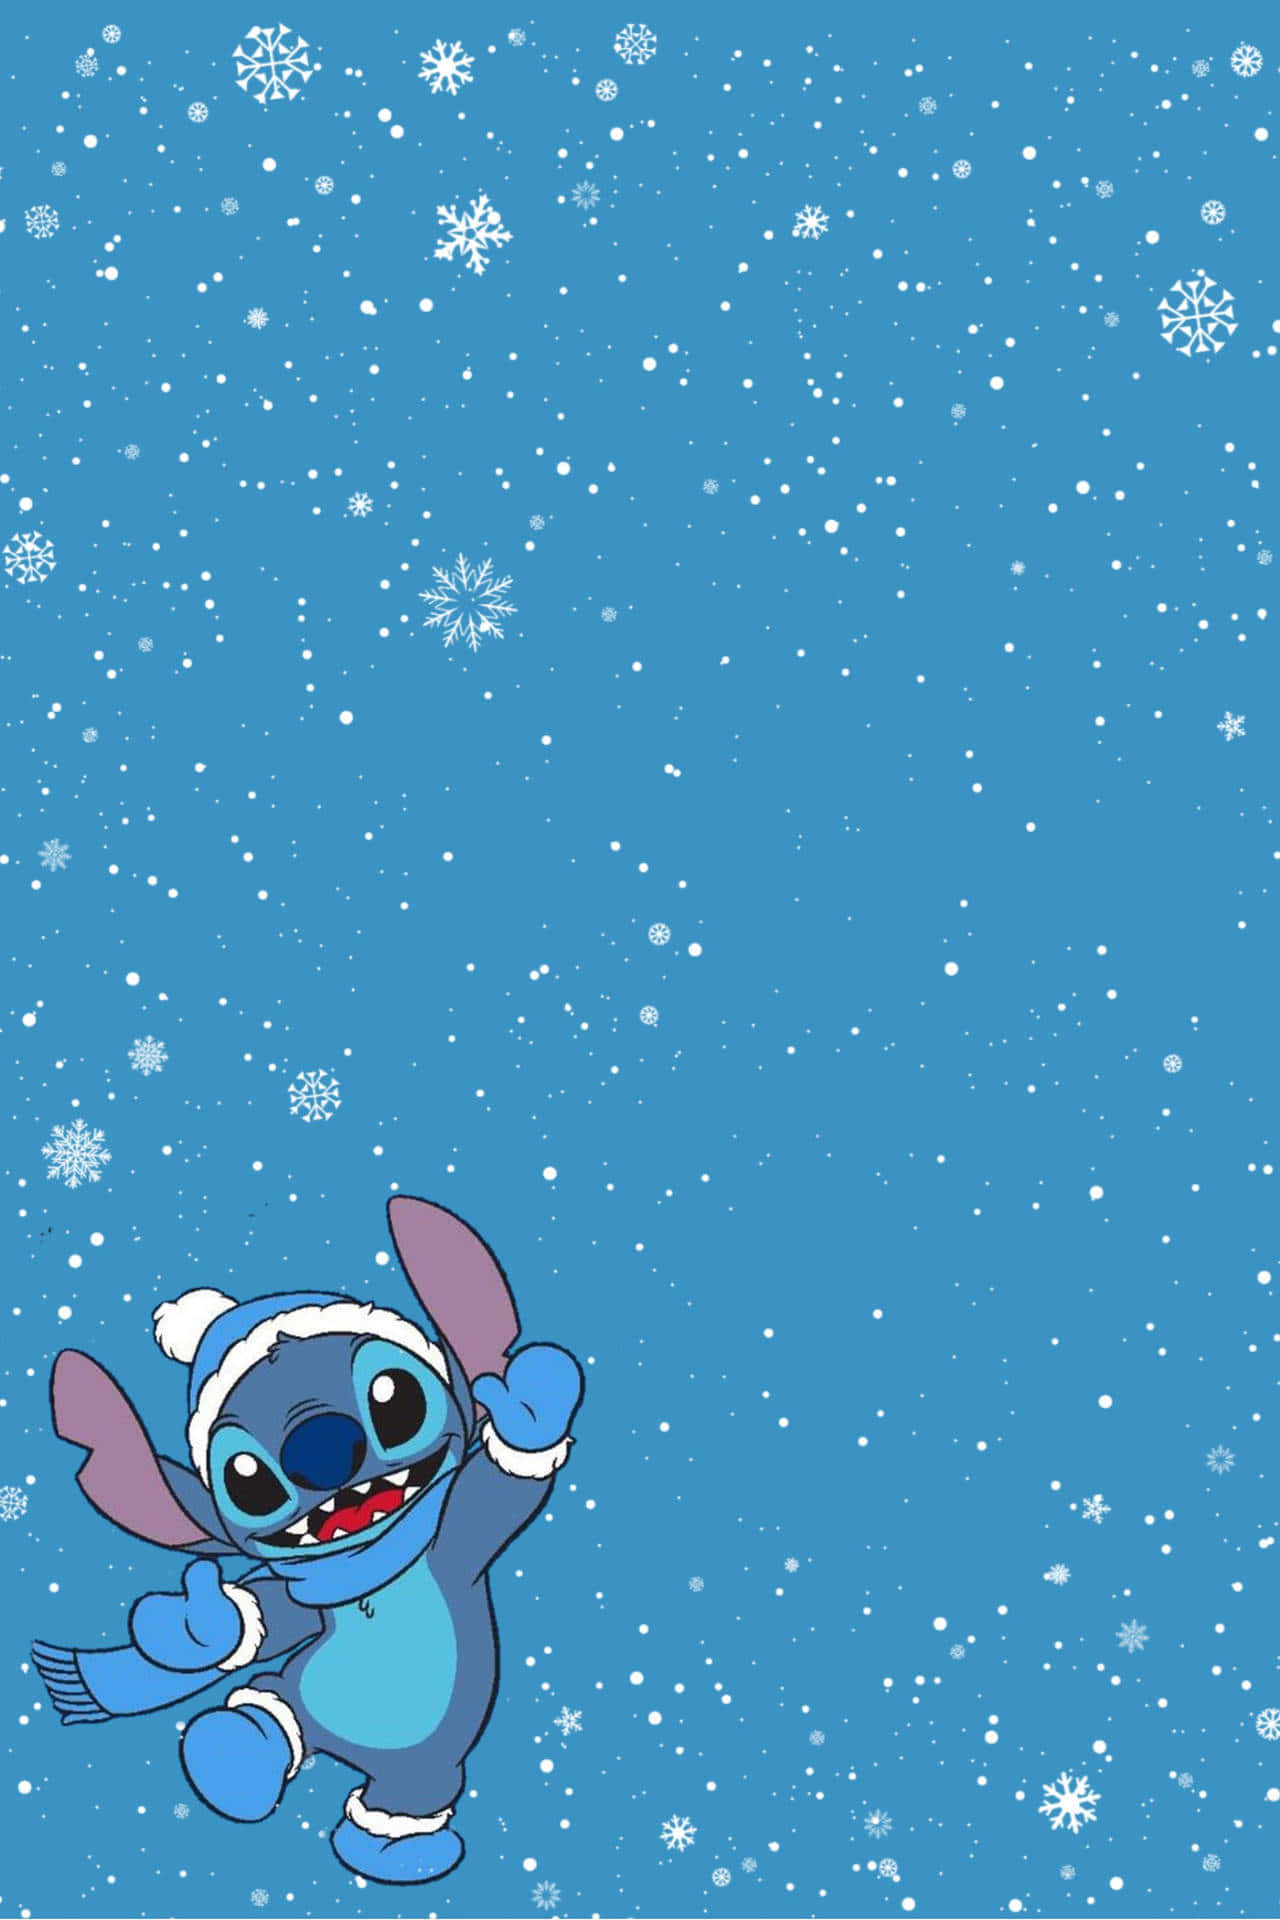 Get Merry with this Festive Phone Background for Christmas!